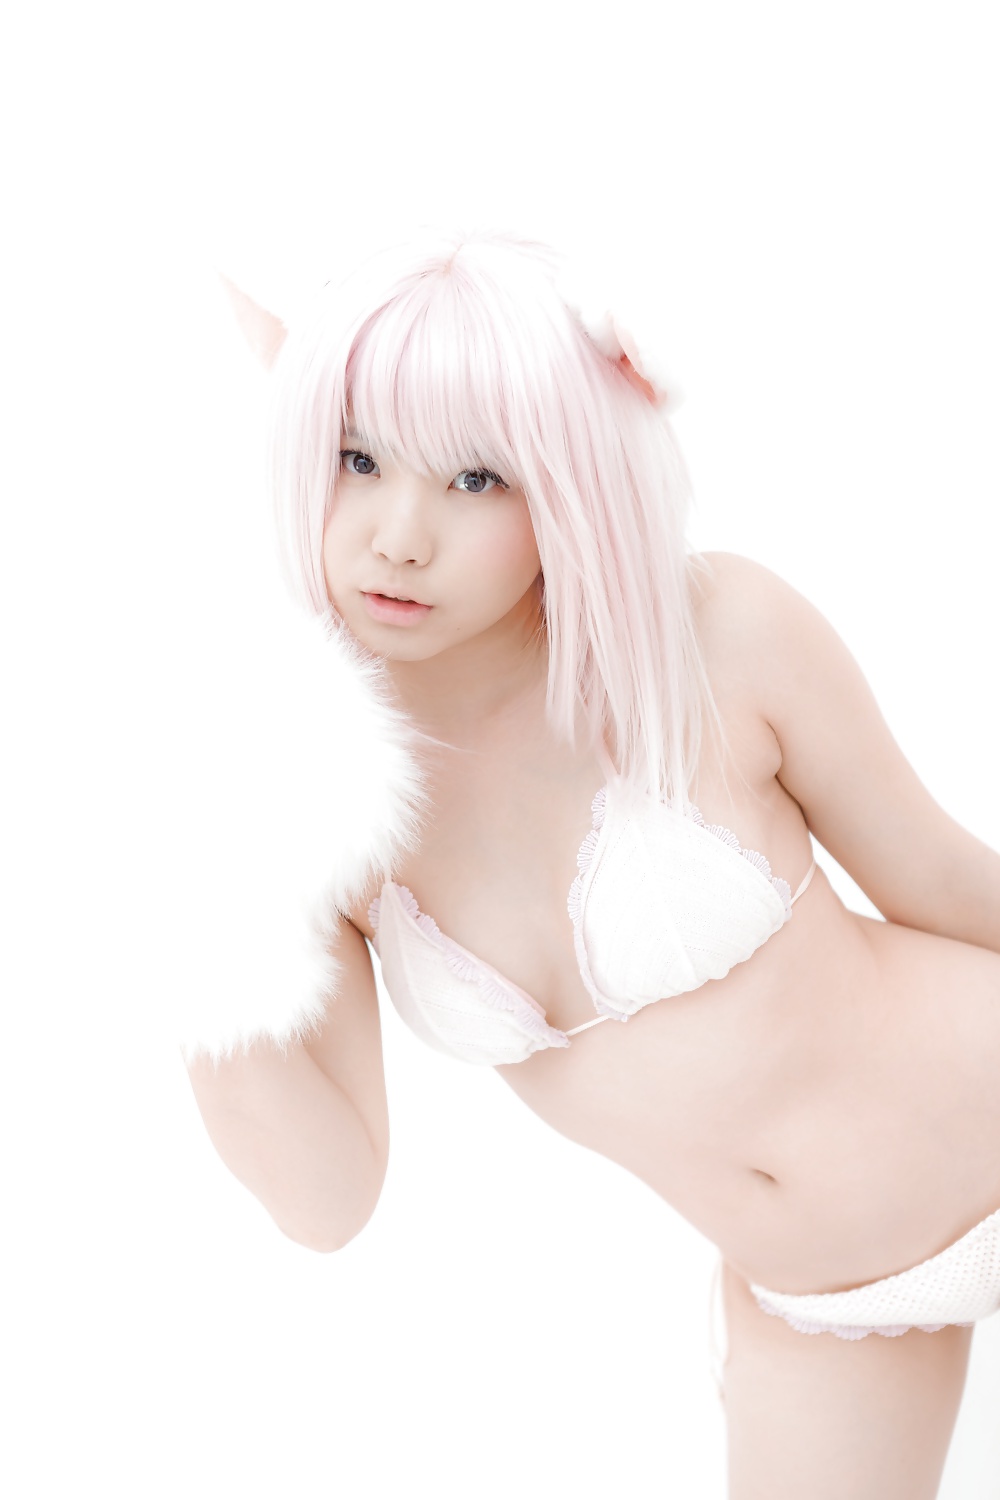 Asiatica cosplay in bianco
 #26558956